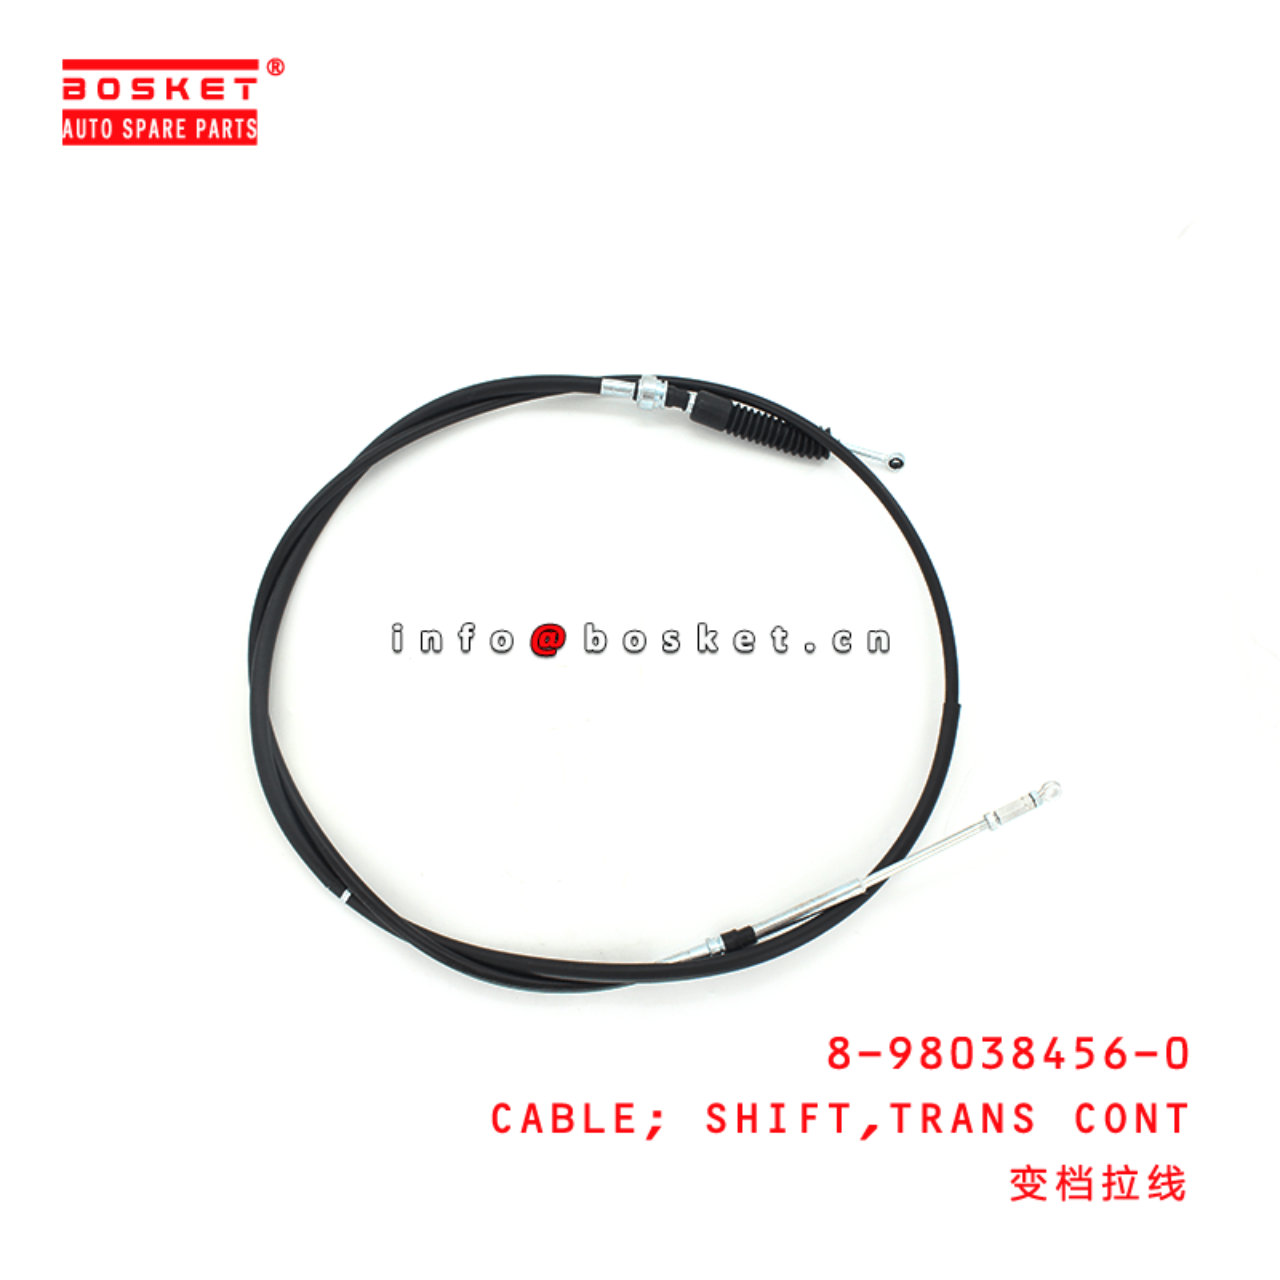 8-98038456-0 Transmission Control Shift Cable 8980384560 Suitable for ISUZU NMR 4JB1T 